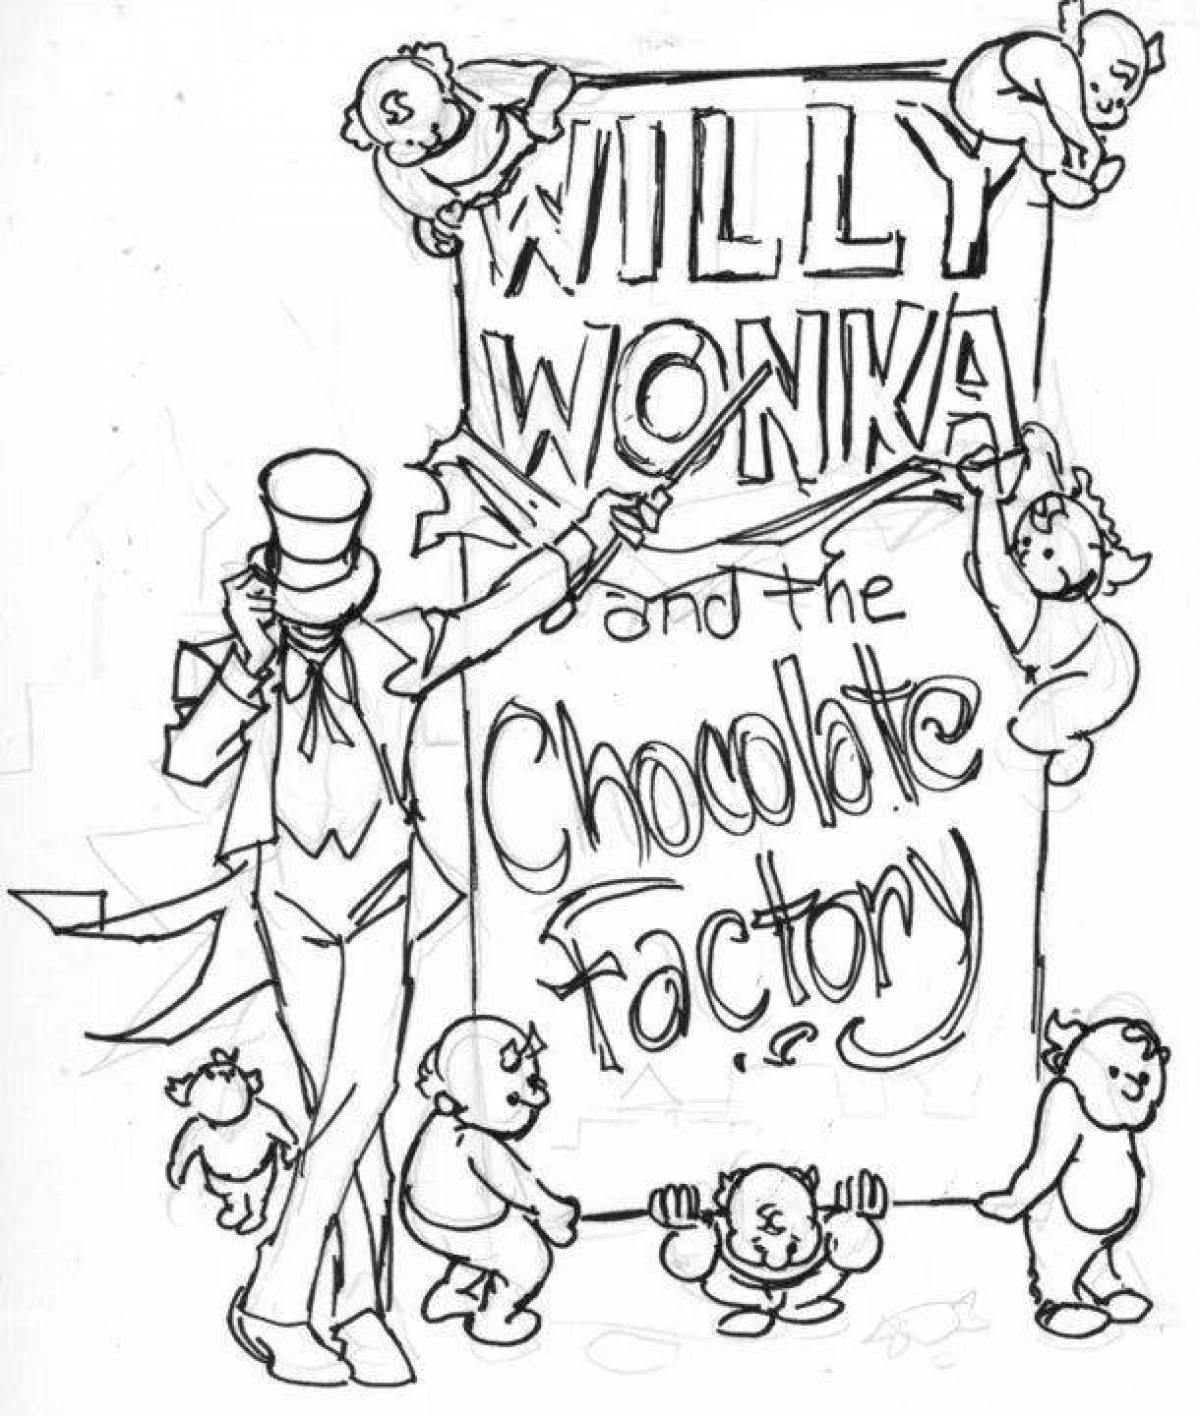 Coloring book shining willy wonka